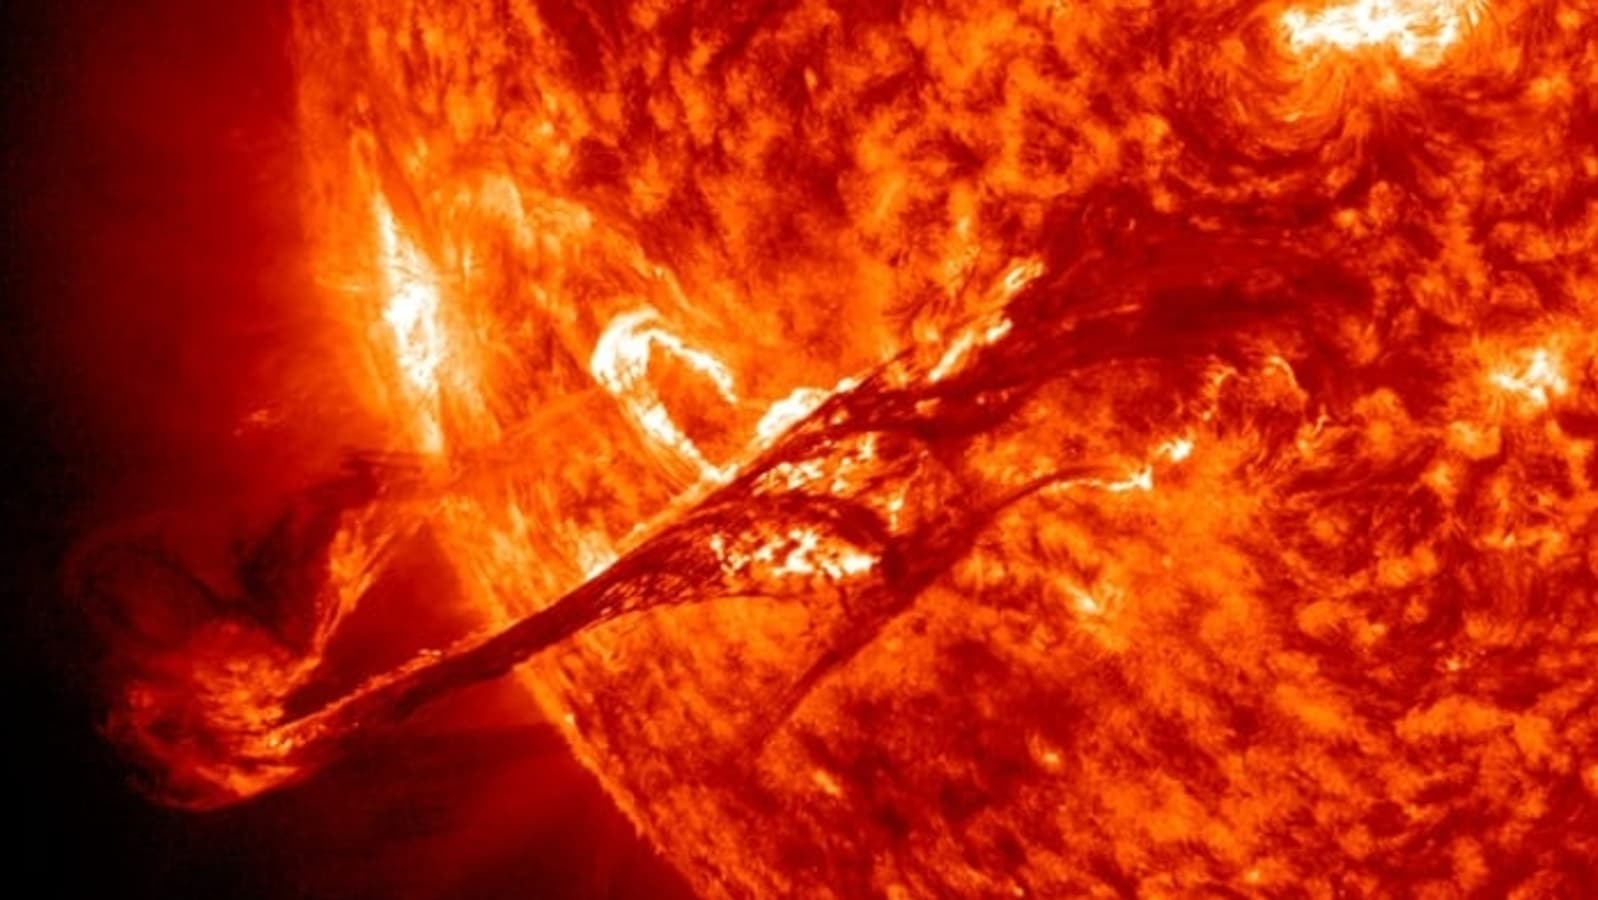 Solar flare alert! Powerful Mclass solar flare could hit Earth today